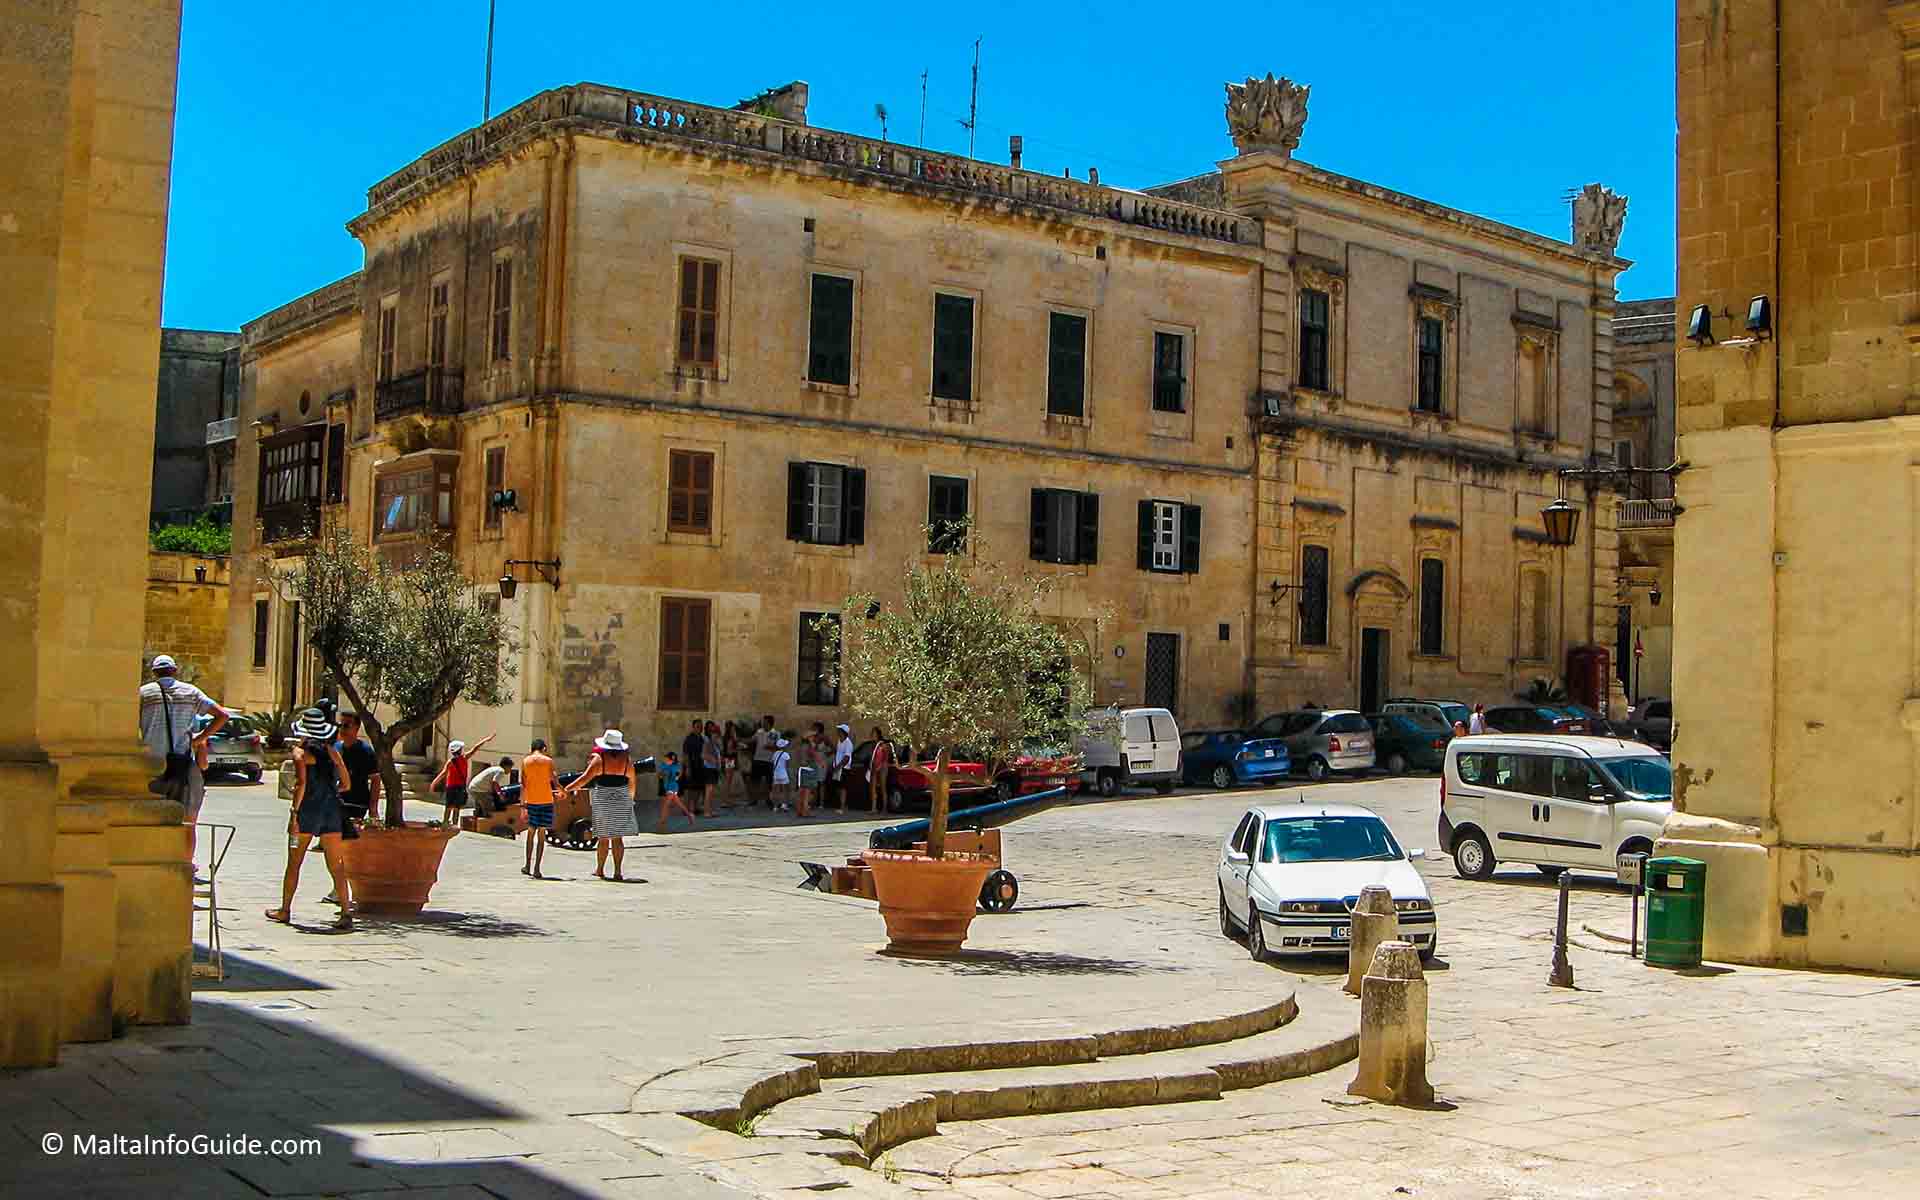 The square in front of the cathedral in La Mdina Malta